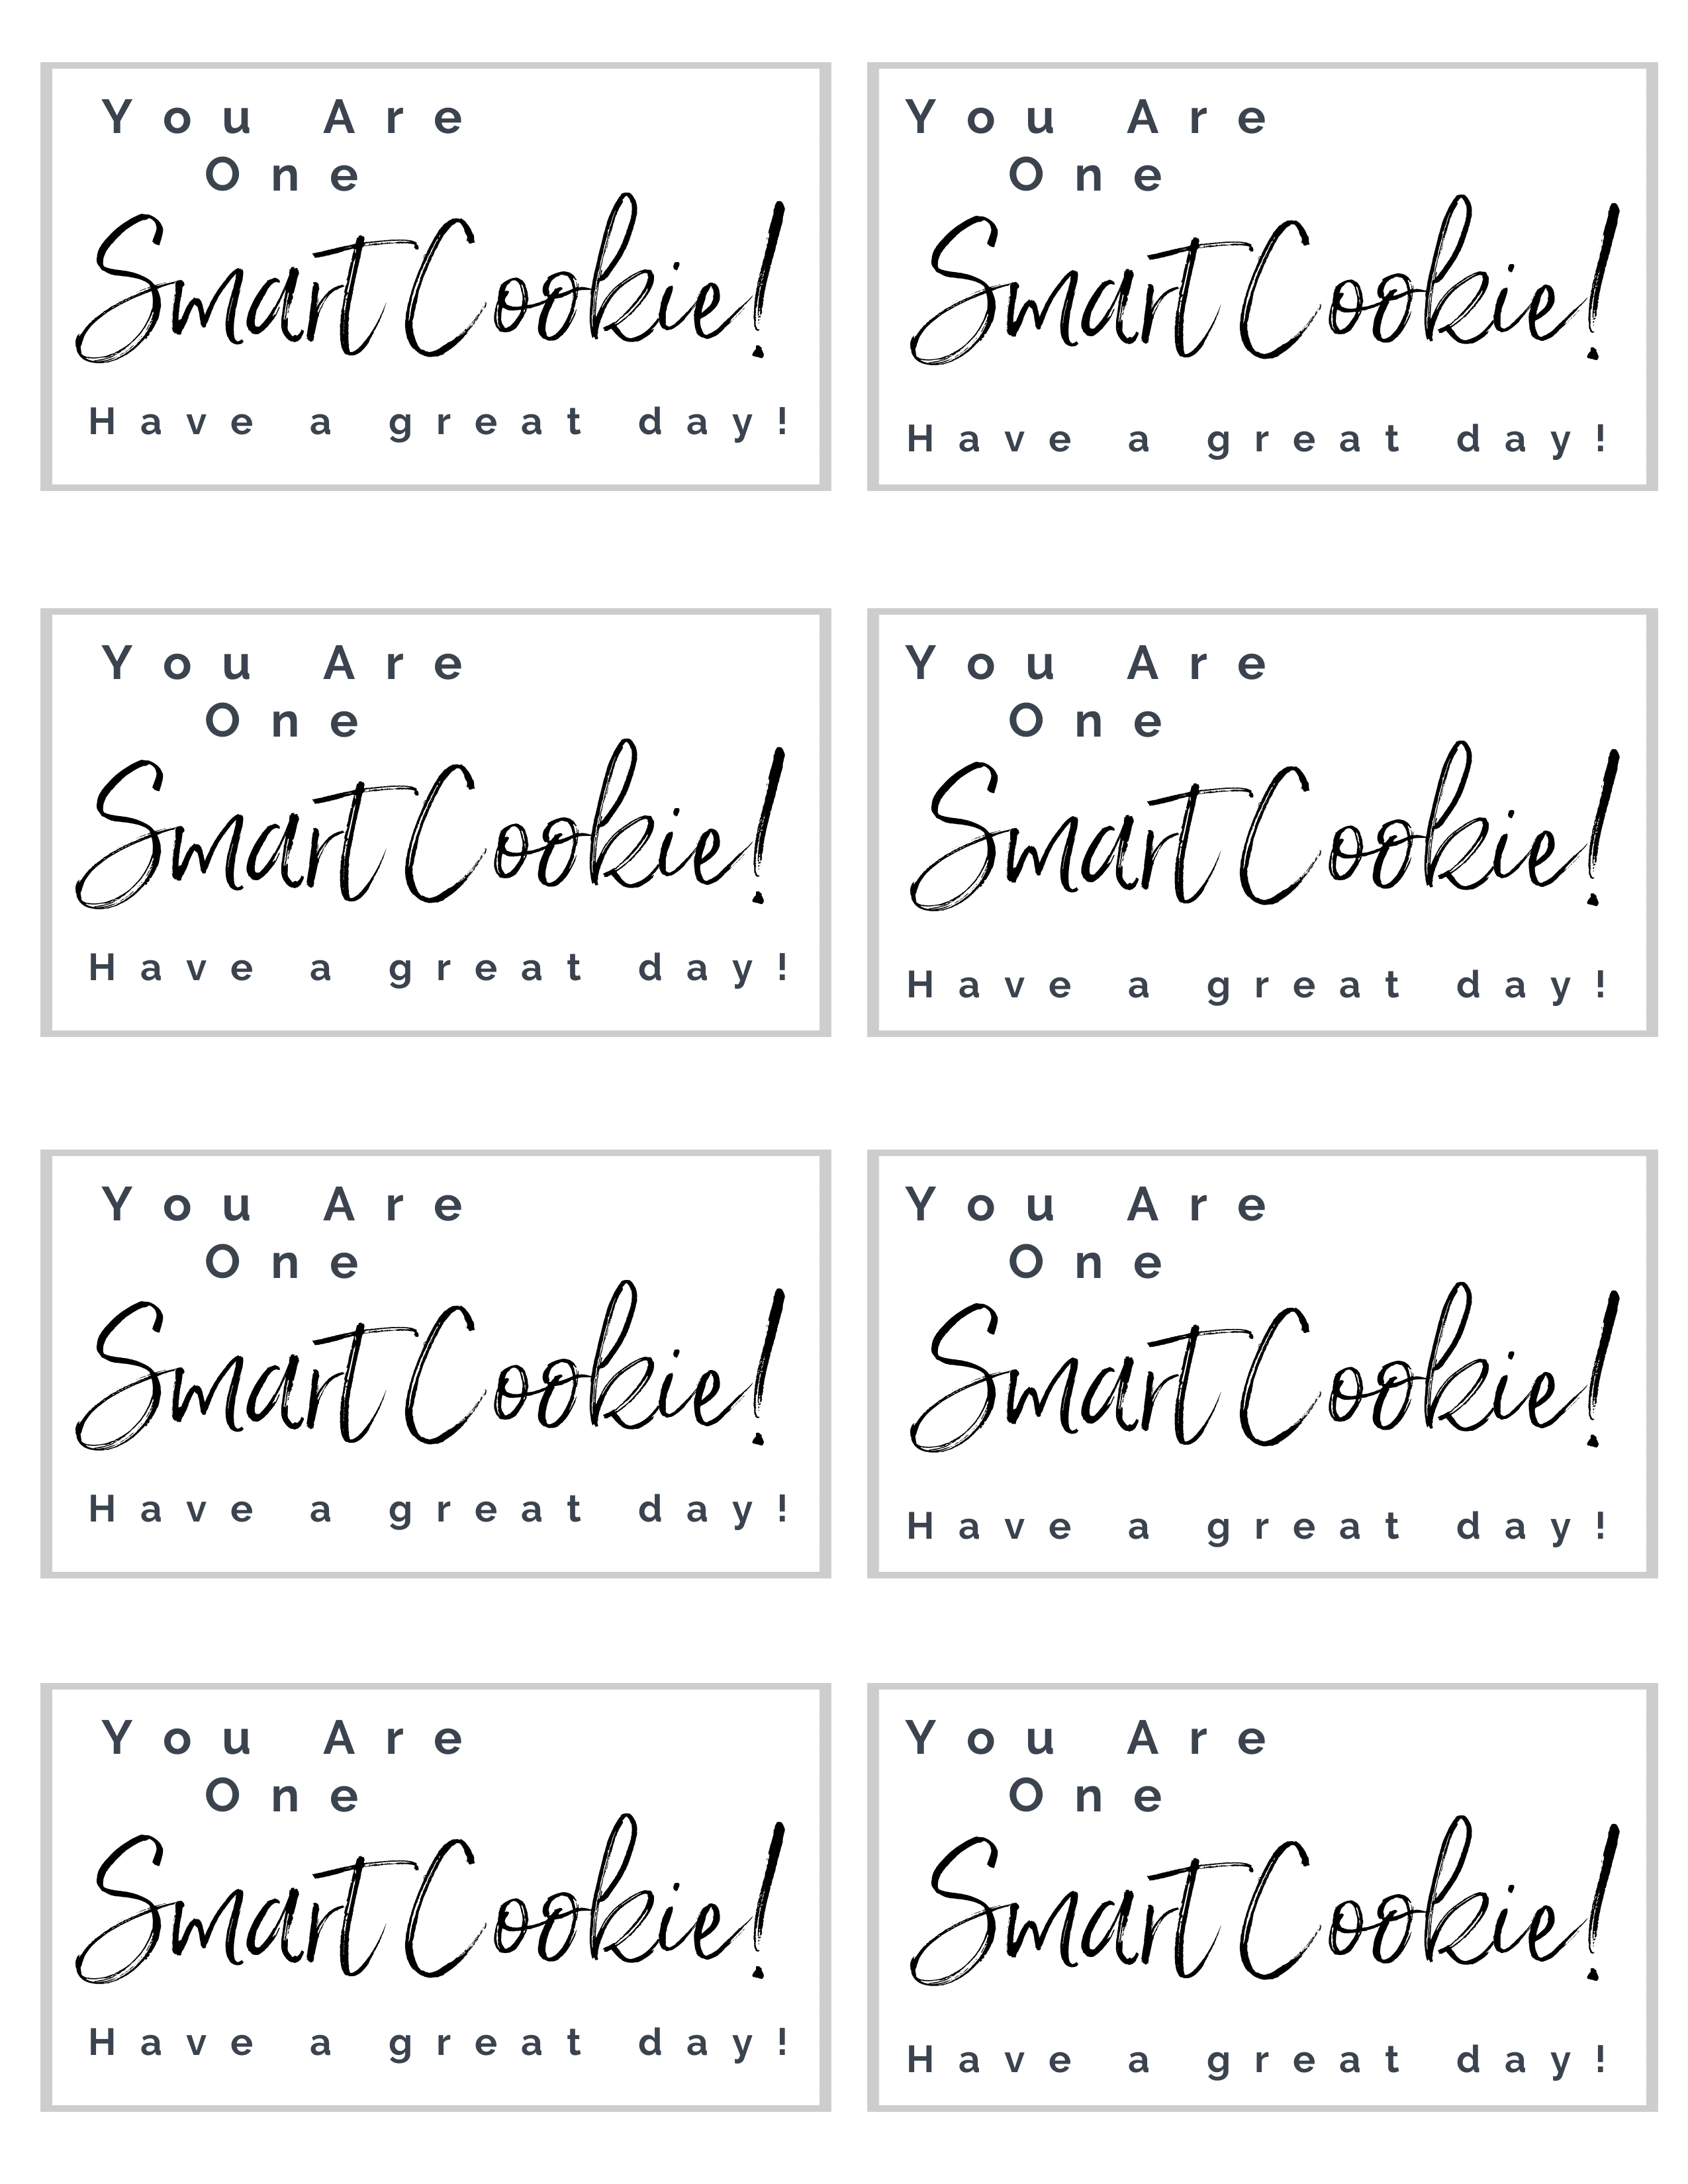 free-lunchbox-printable-one-smart-cookie-shesaved